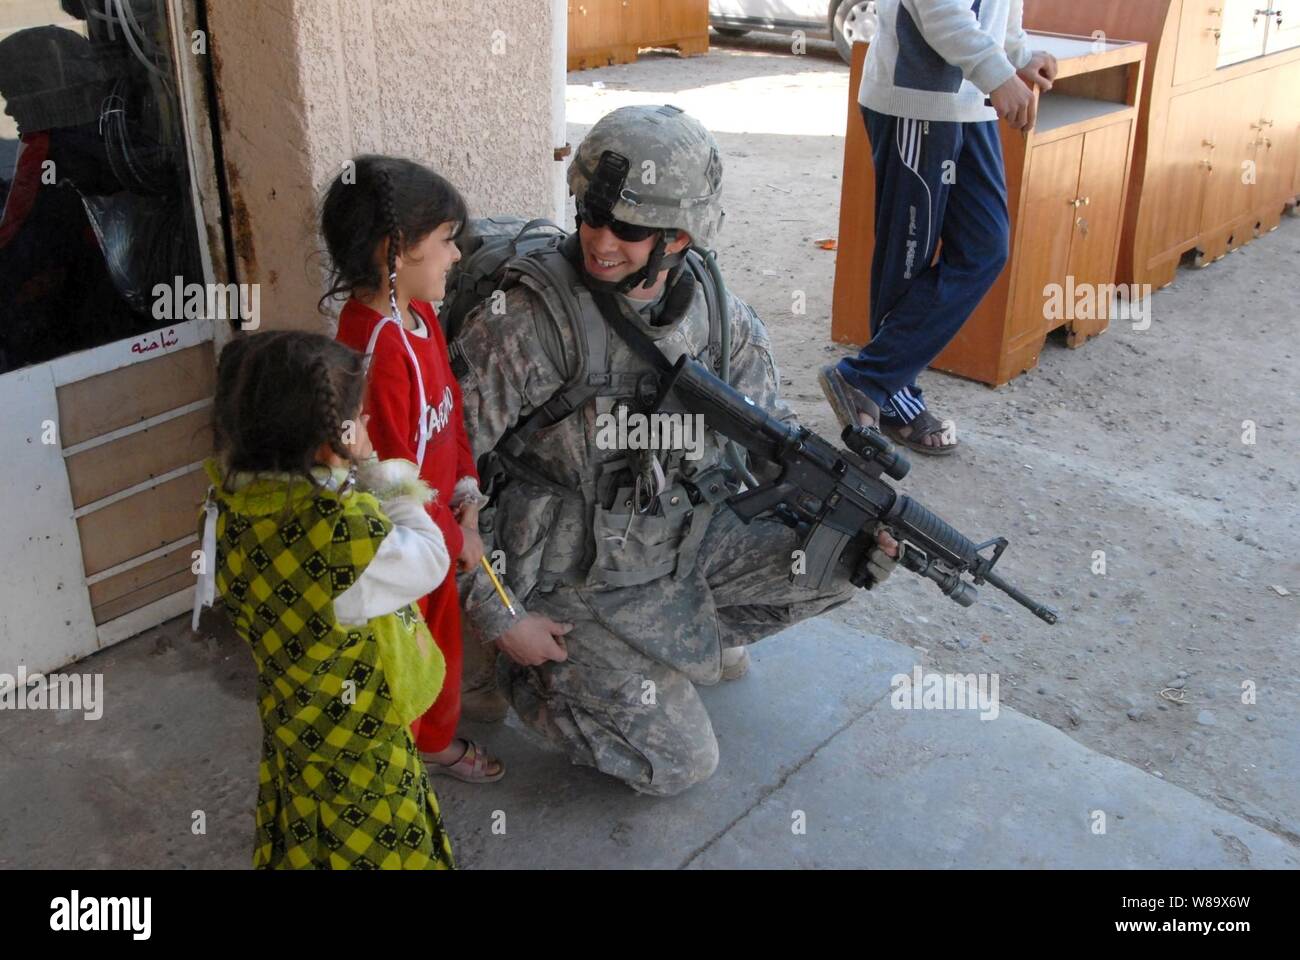 U.S. Army Pfc. Toby Barnes of 2nd Brigade Combat Team, 4th Infantry Division talks to two Iraqi girls during a joint patrol with Iraqi police to conduct post-election surveys in Iman, Iraq, on Feb. 3, 2009. Stock Photo